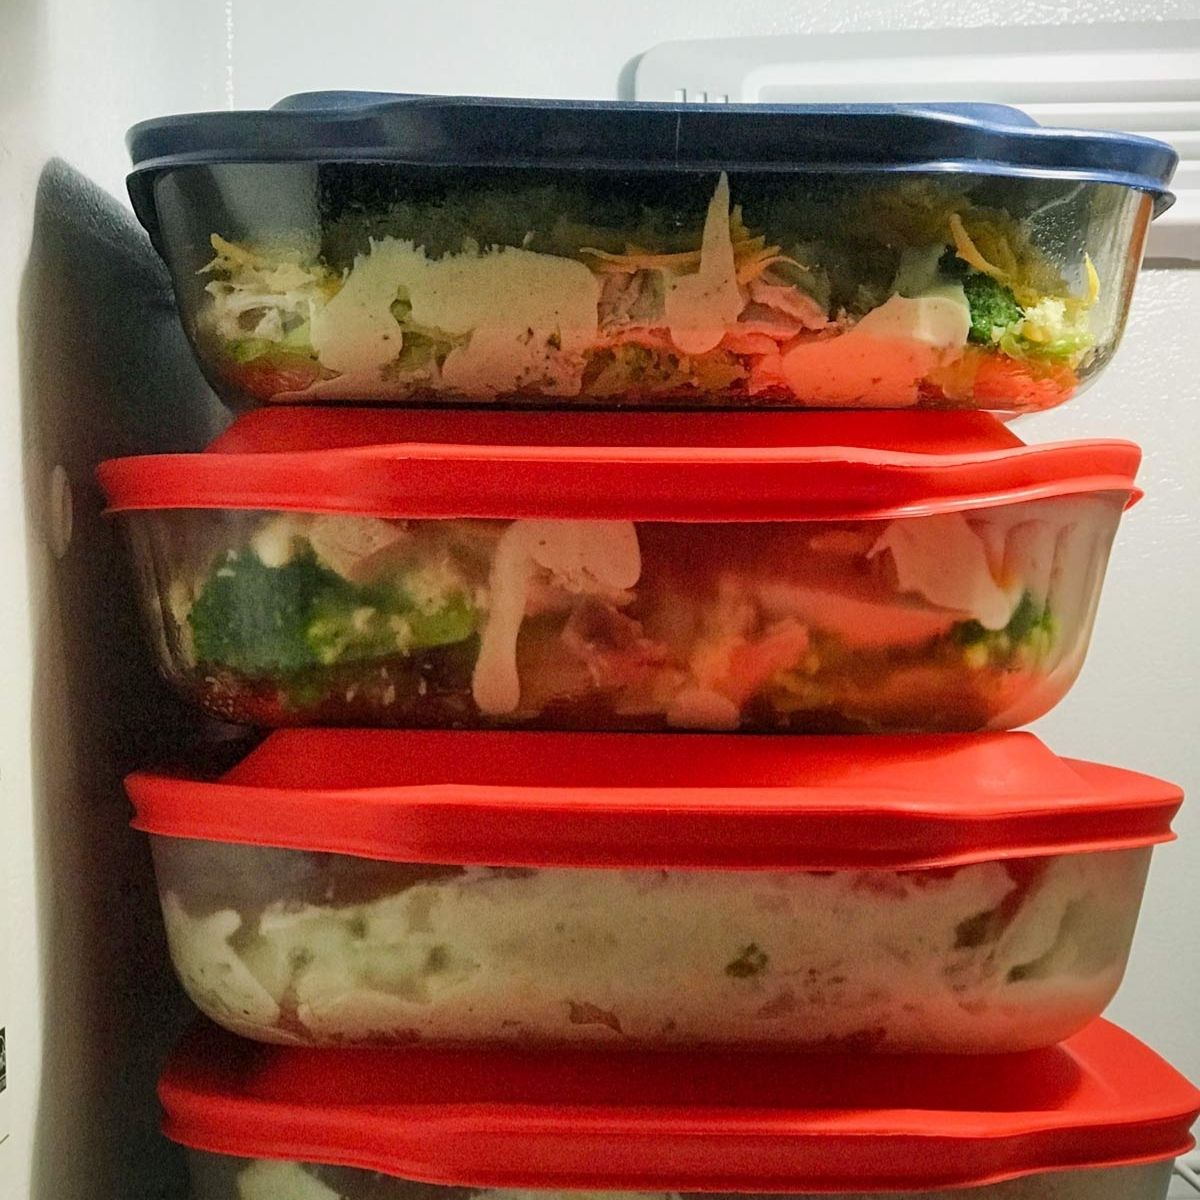 The Best Meal Prep (and freezer meal) Containers to buy! - Meal